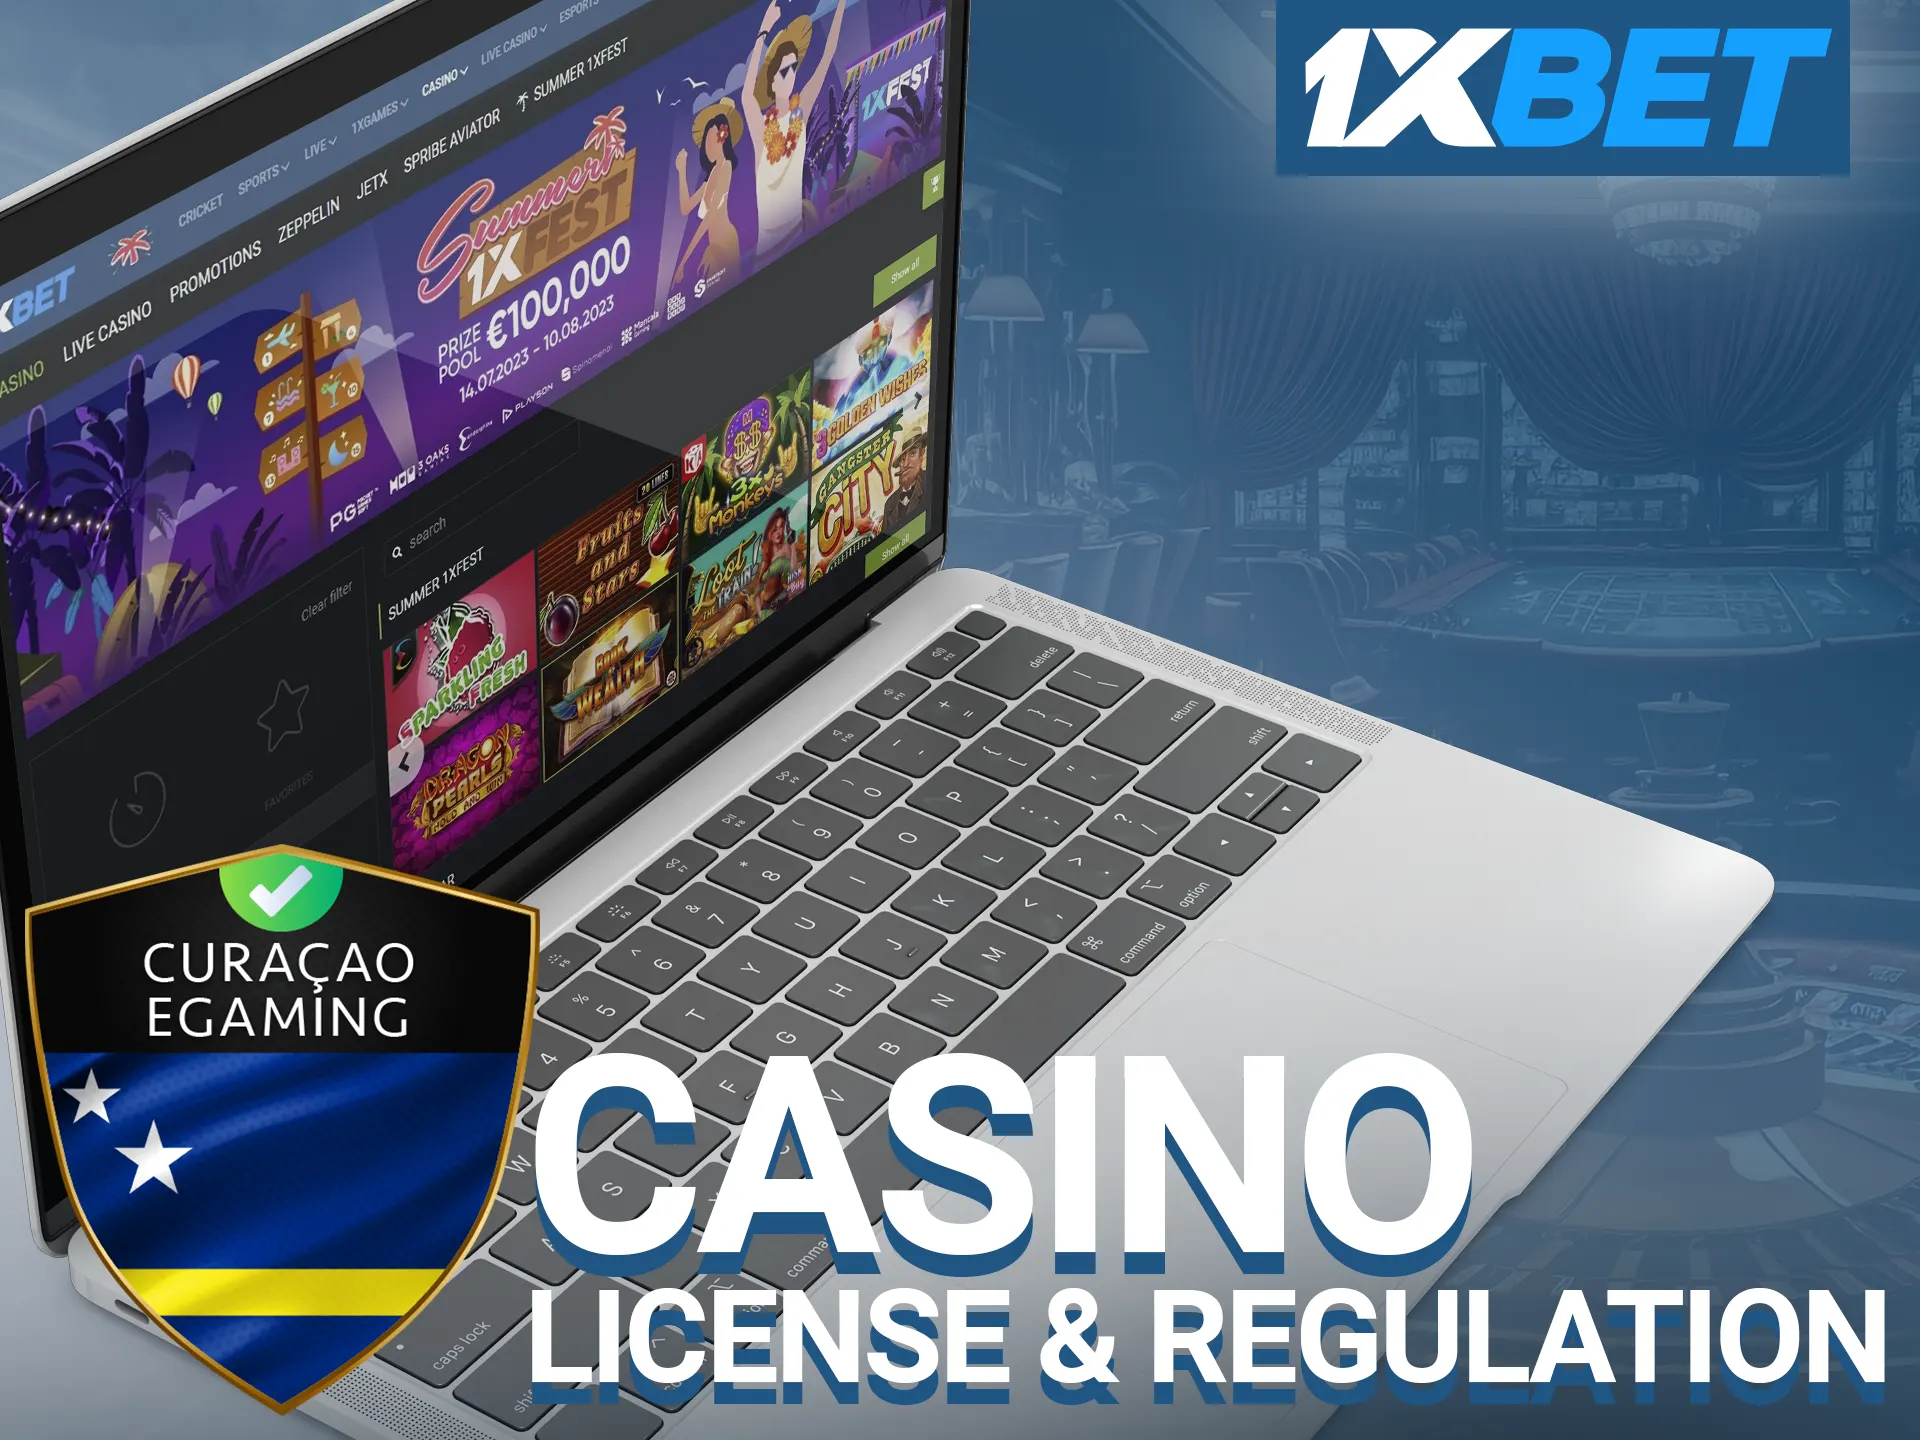 1xbet holds a license from Curaсao.